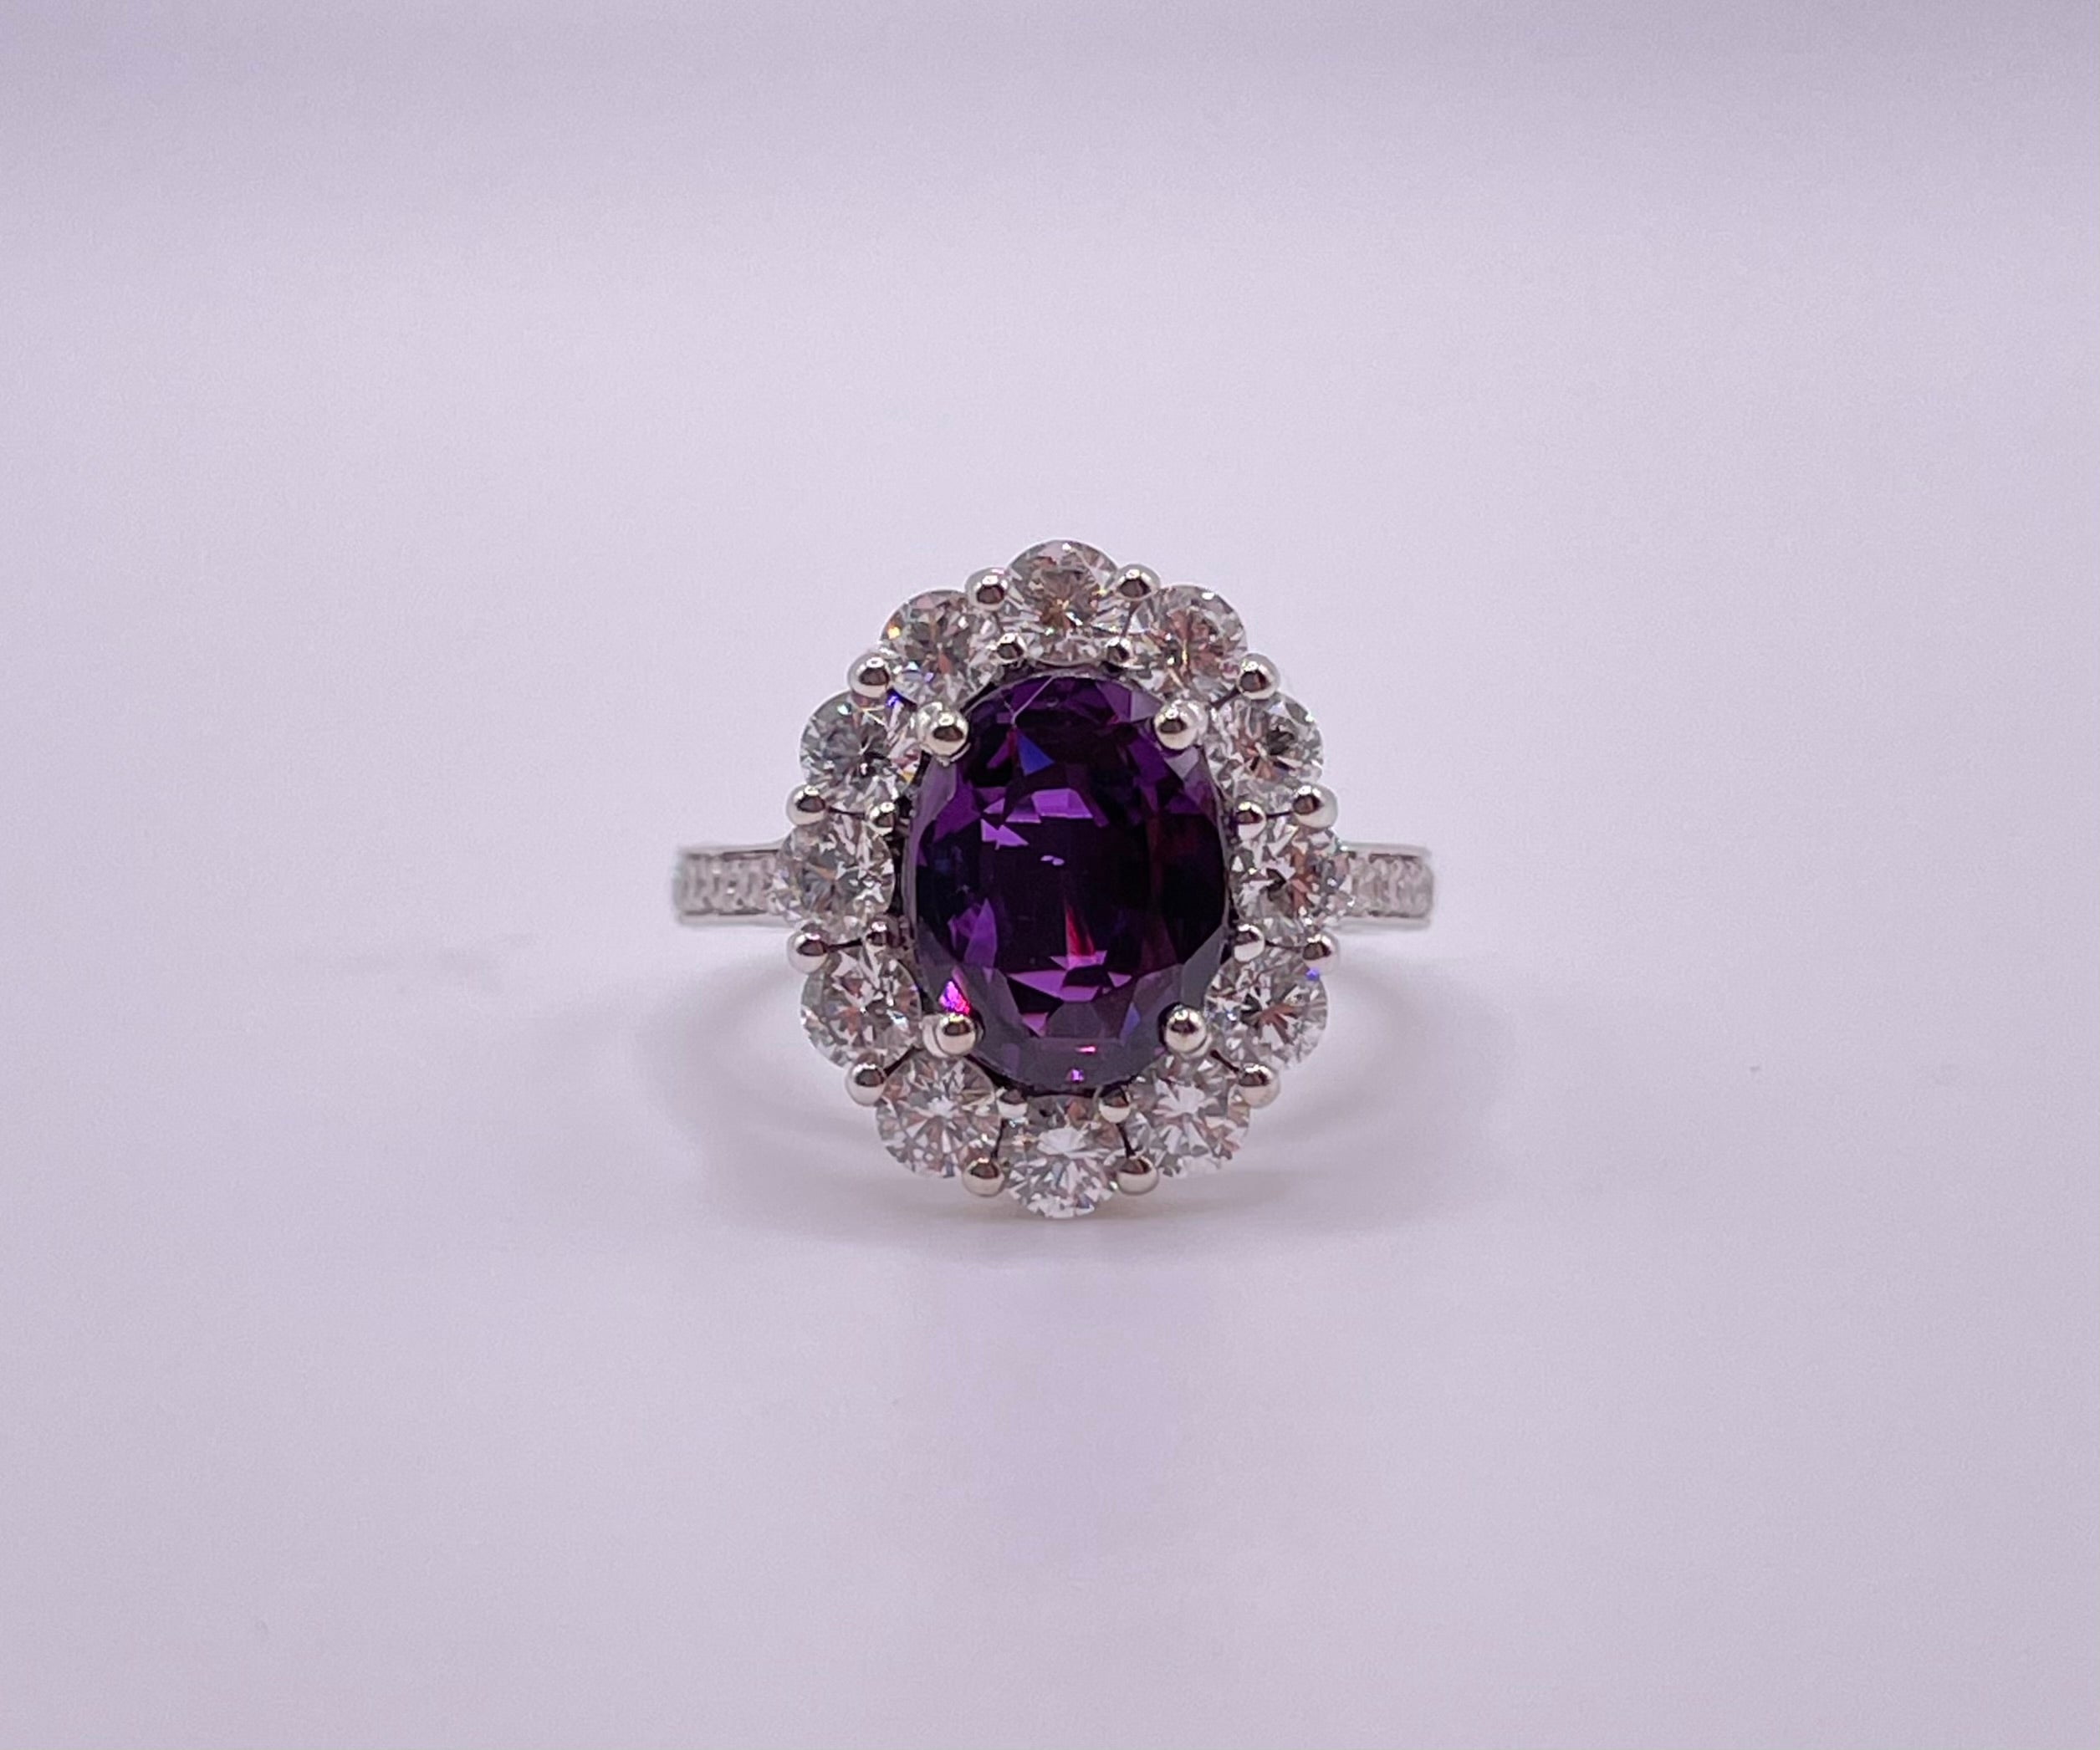 This stunning rare Reddish purple sapphire is set in a handmade 18k white gold diamond setting.
The sapphire is GIA certified.
The beautiful color-tone against the bright, vibrant diamonds makes it stand out and will attract everyone's attention.